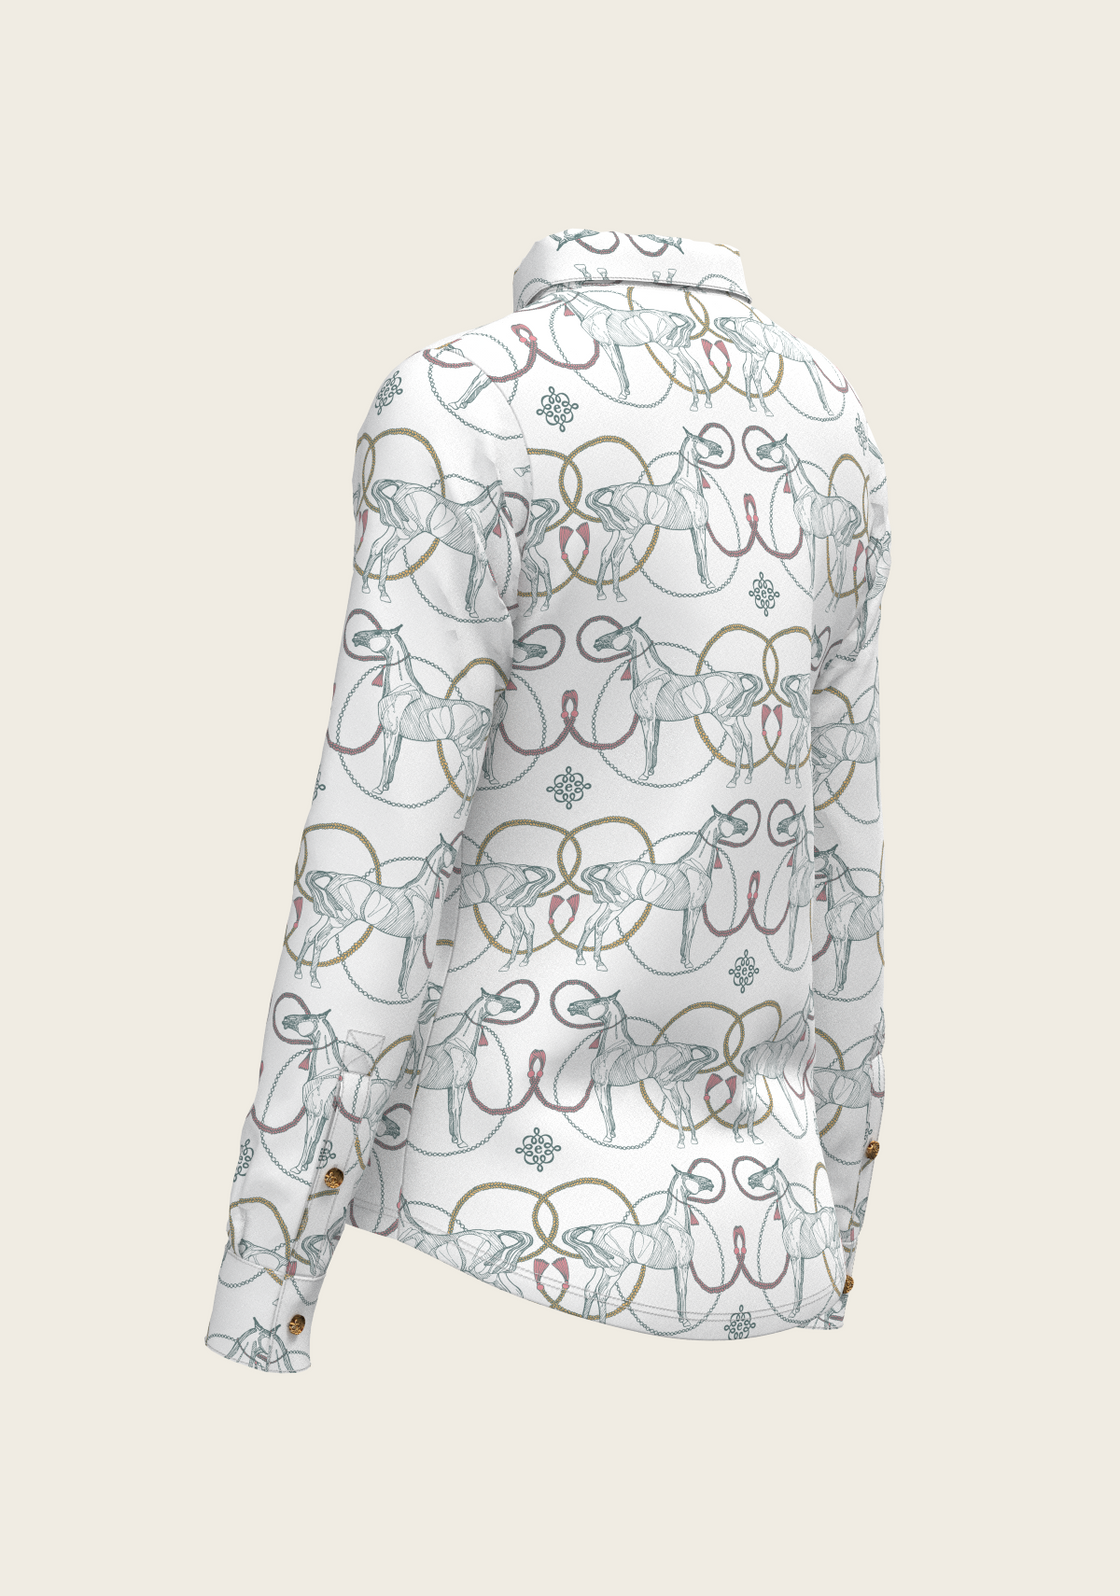 Teal Roped Horses on White Ladies Button Shirt